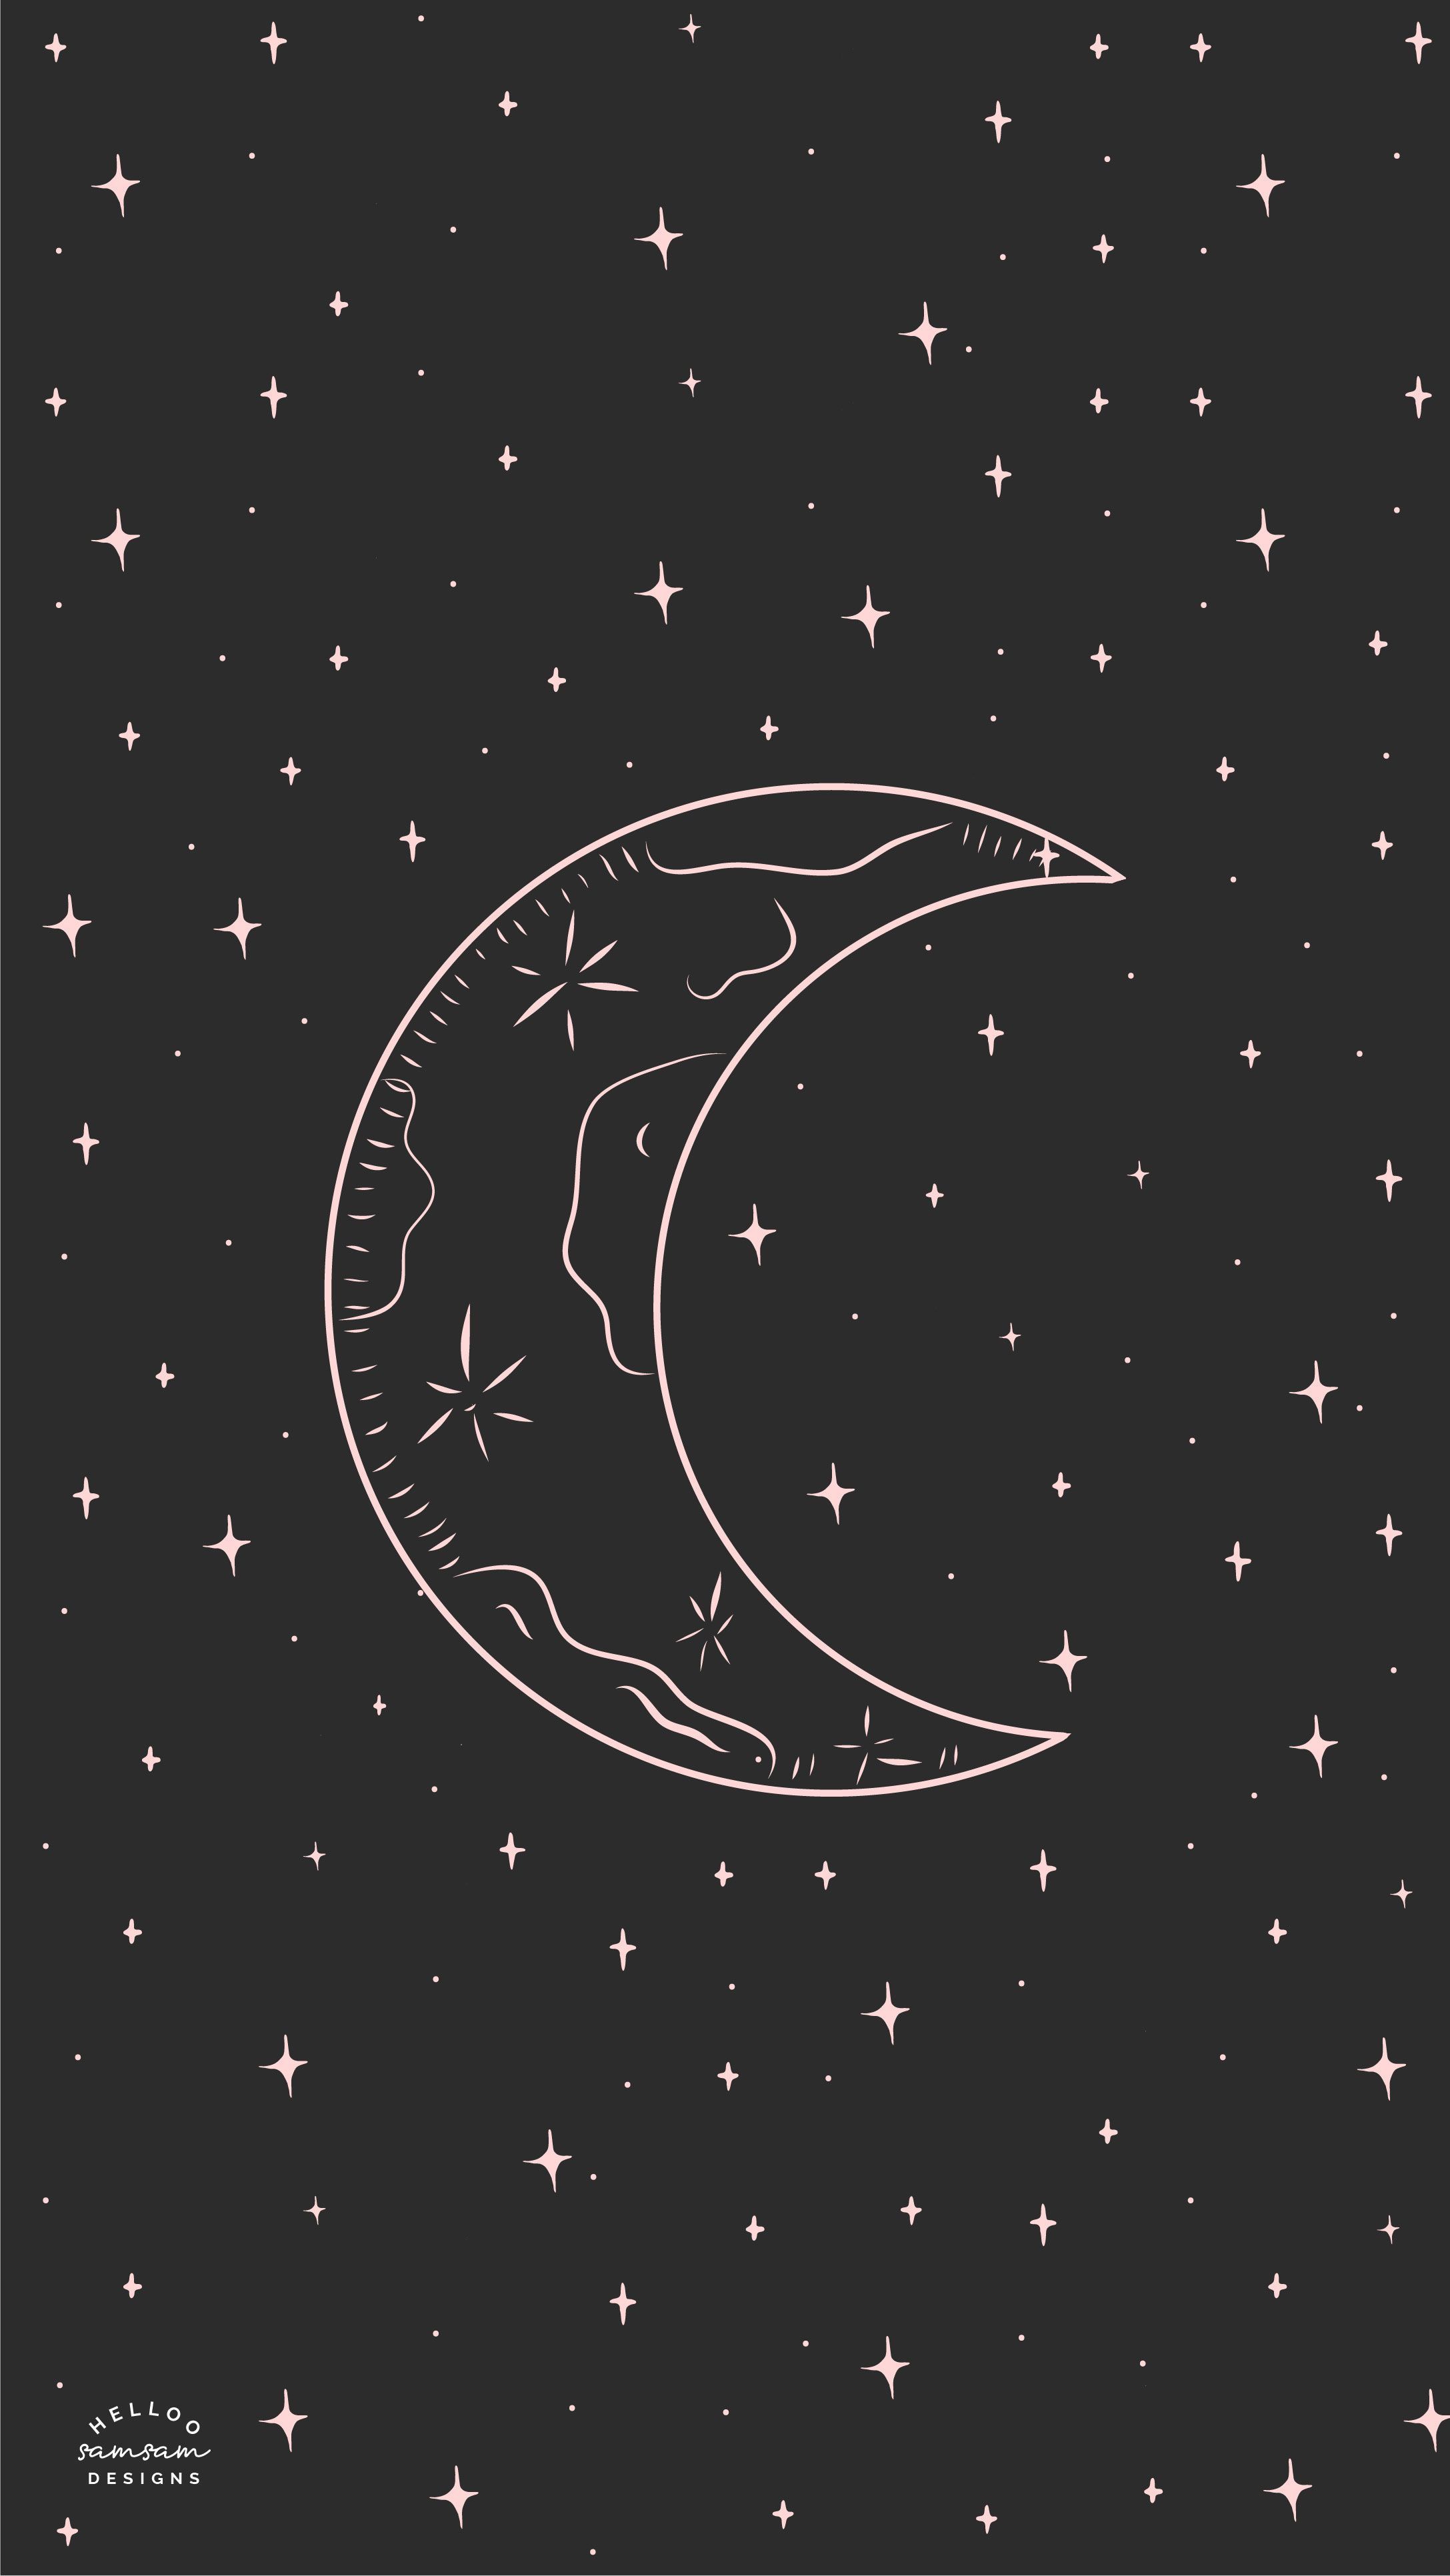 A crescent moon with stars on it - Moon phases